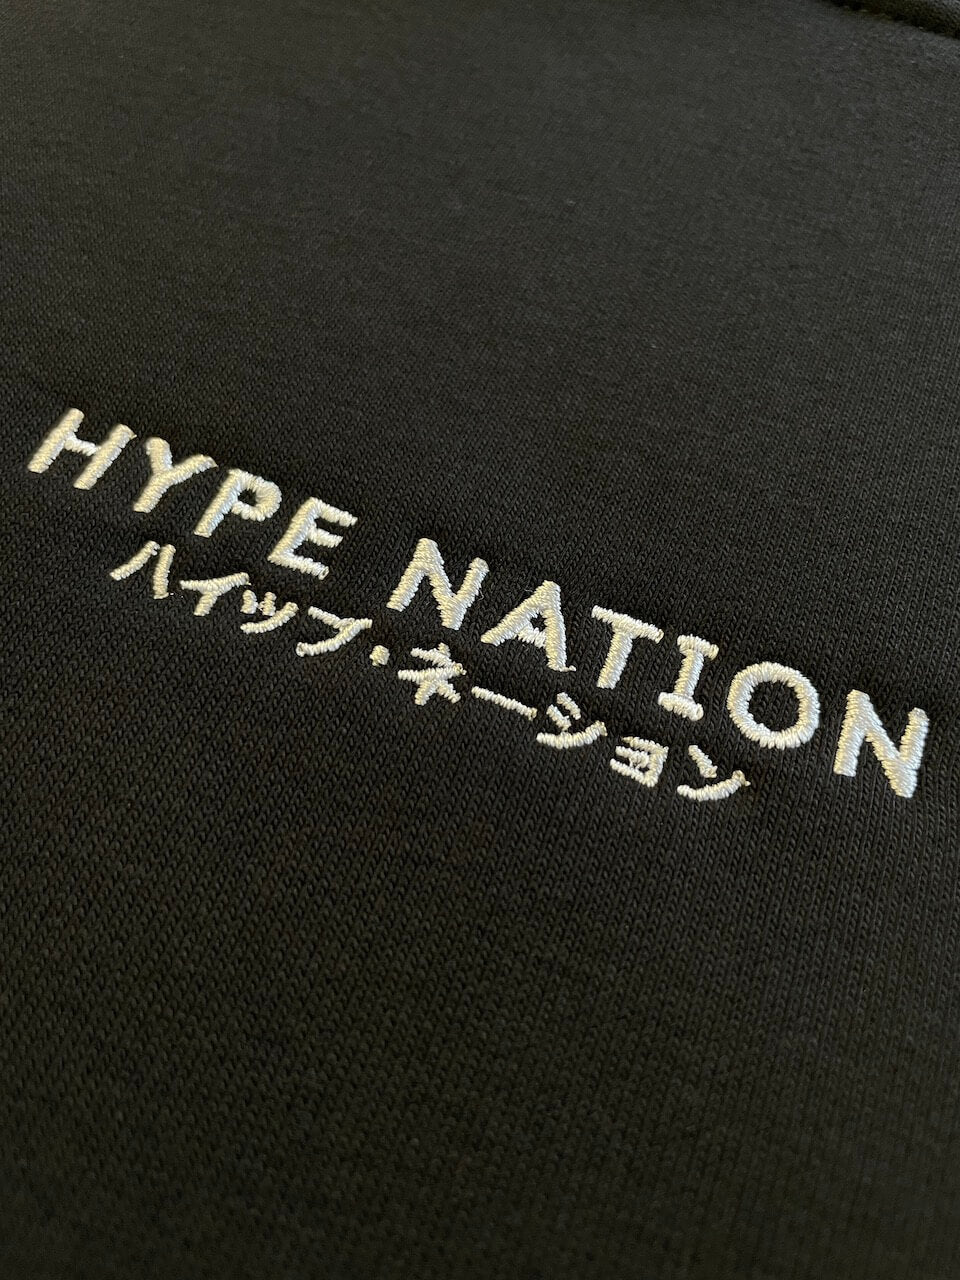 Chapter 1 - Baby Zilla Hoodie - Hype Nation